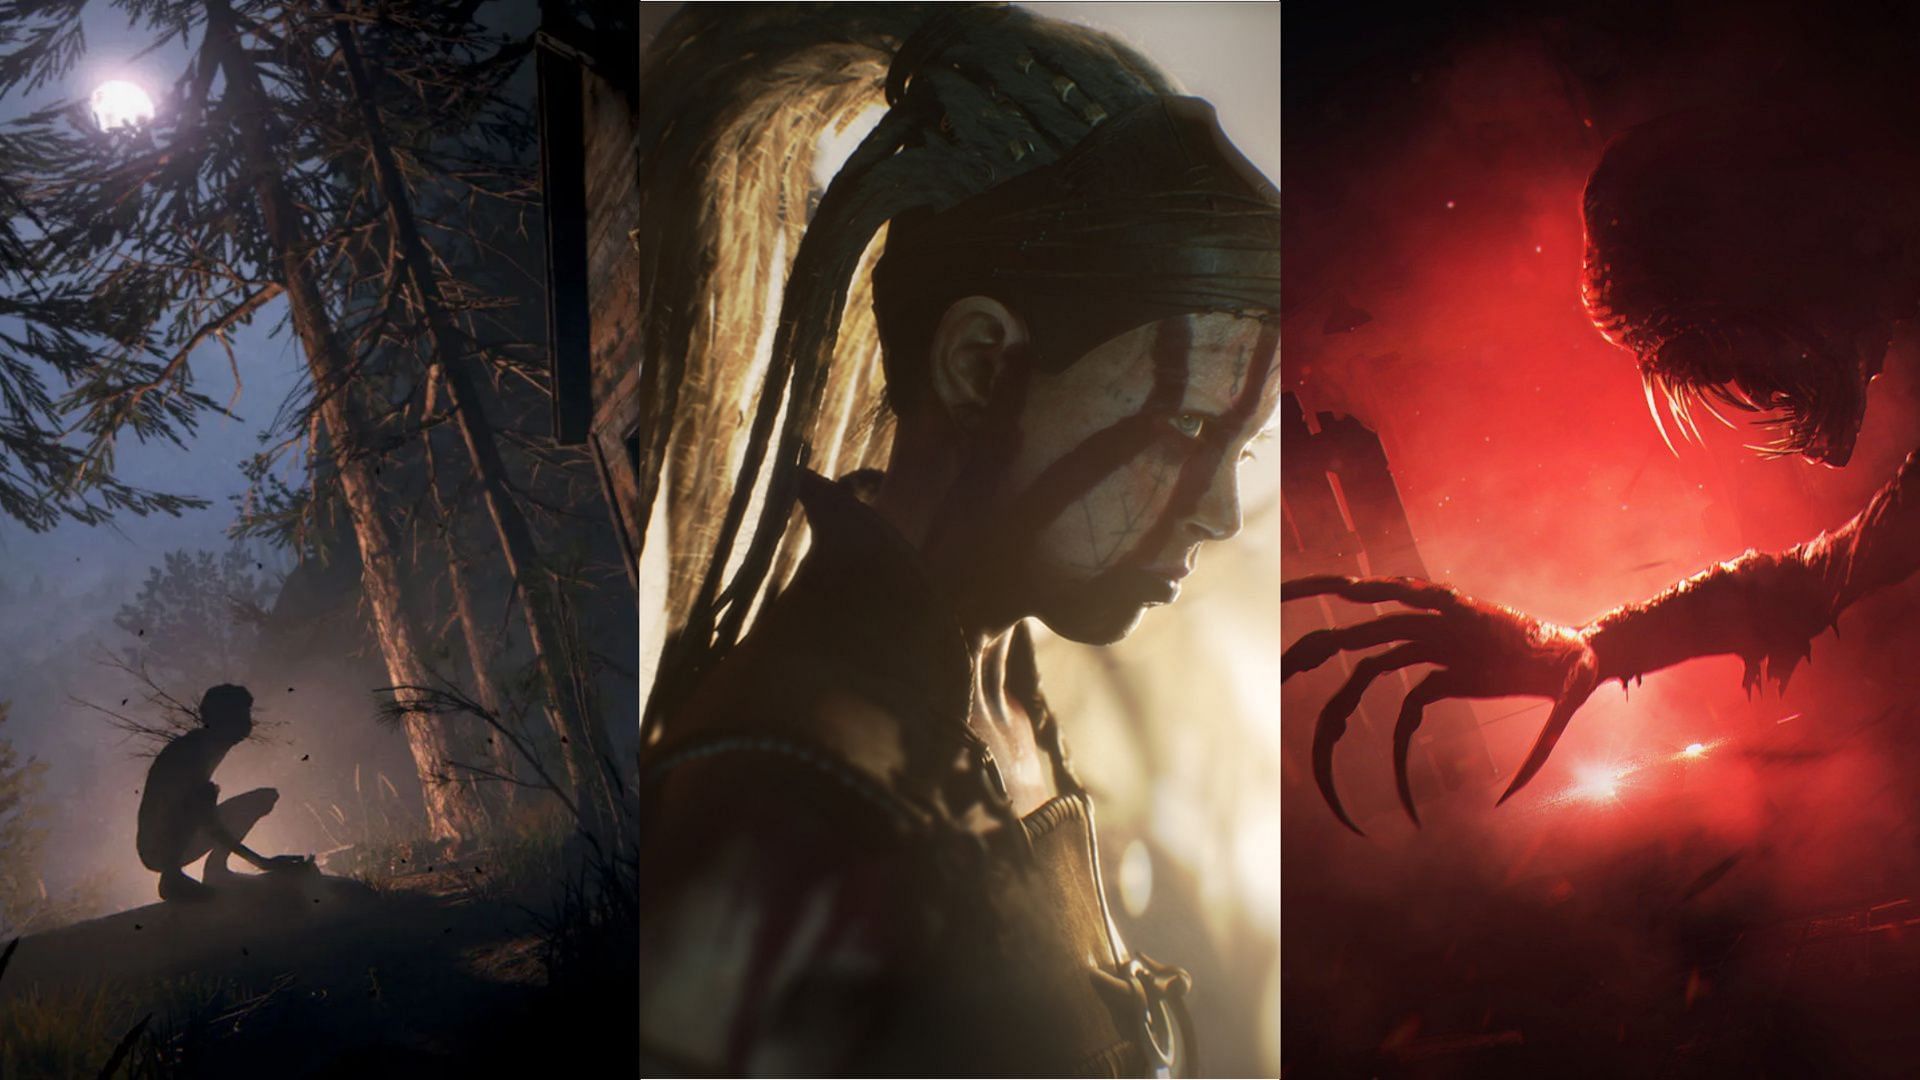 While Ninja Theory has confirmed a 2024 release, an exact date is yet to be disclosed. (Image via Steam, X/ @frictionalgames and @NinjaTheory)